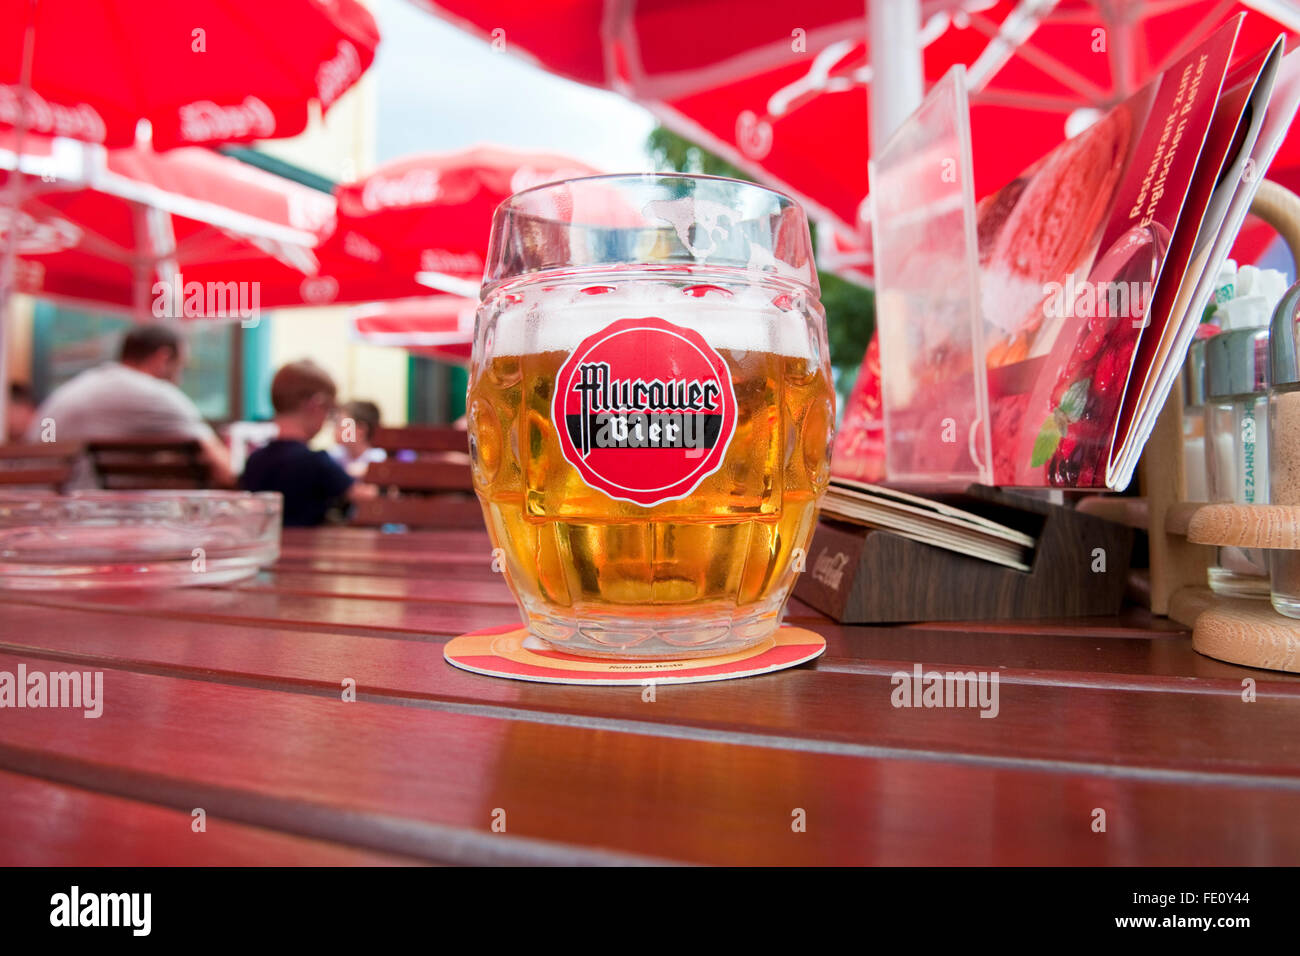 A glass of Murauer beer on an outside table at a cafe in Vienna Stock Photo